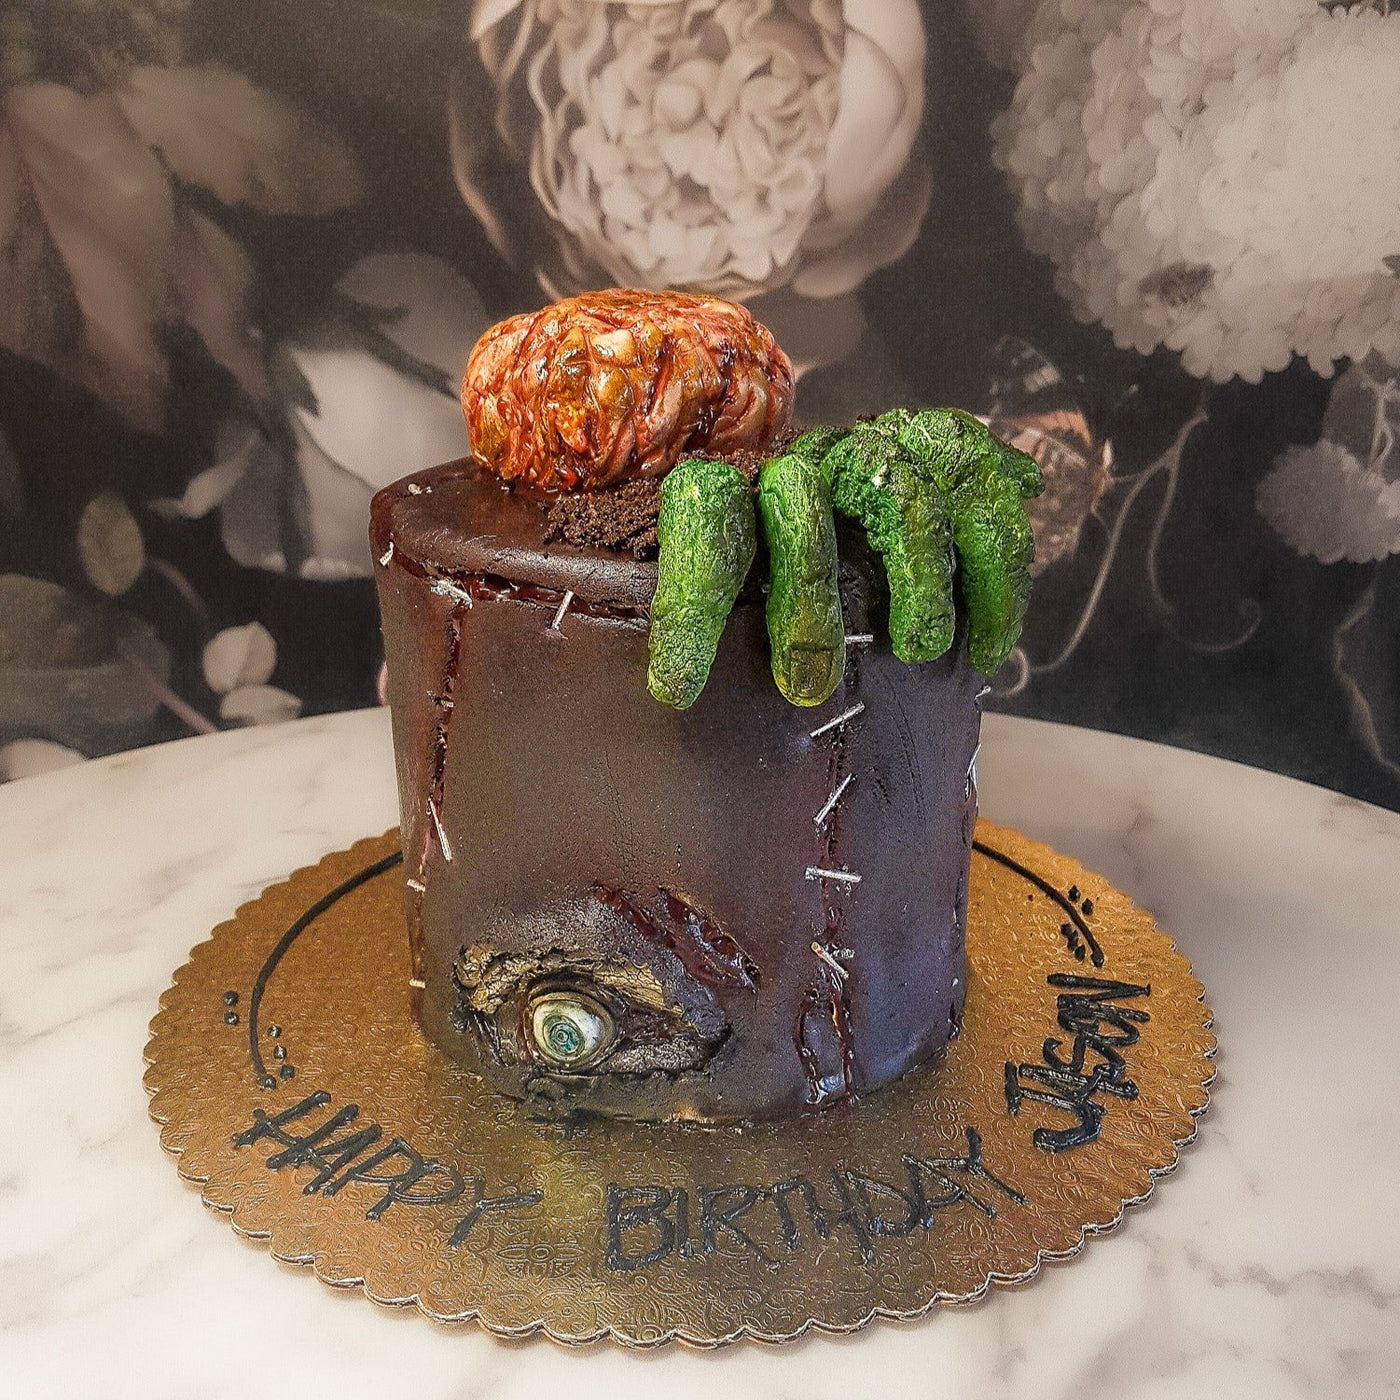 Although visually rotting, this fondant covered cake is moist and delicious on the inside. This infected character is bound to create a horrifying centerpiece- perfect for your October celebration!